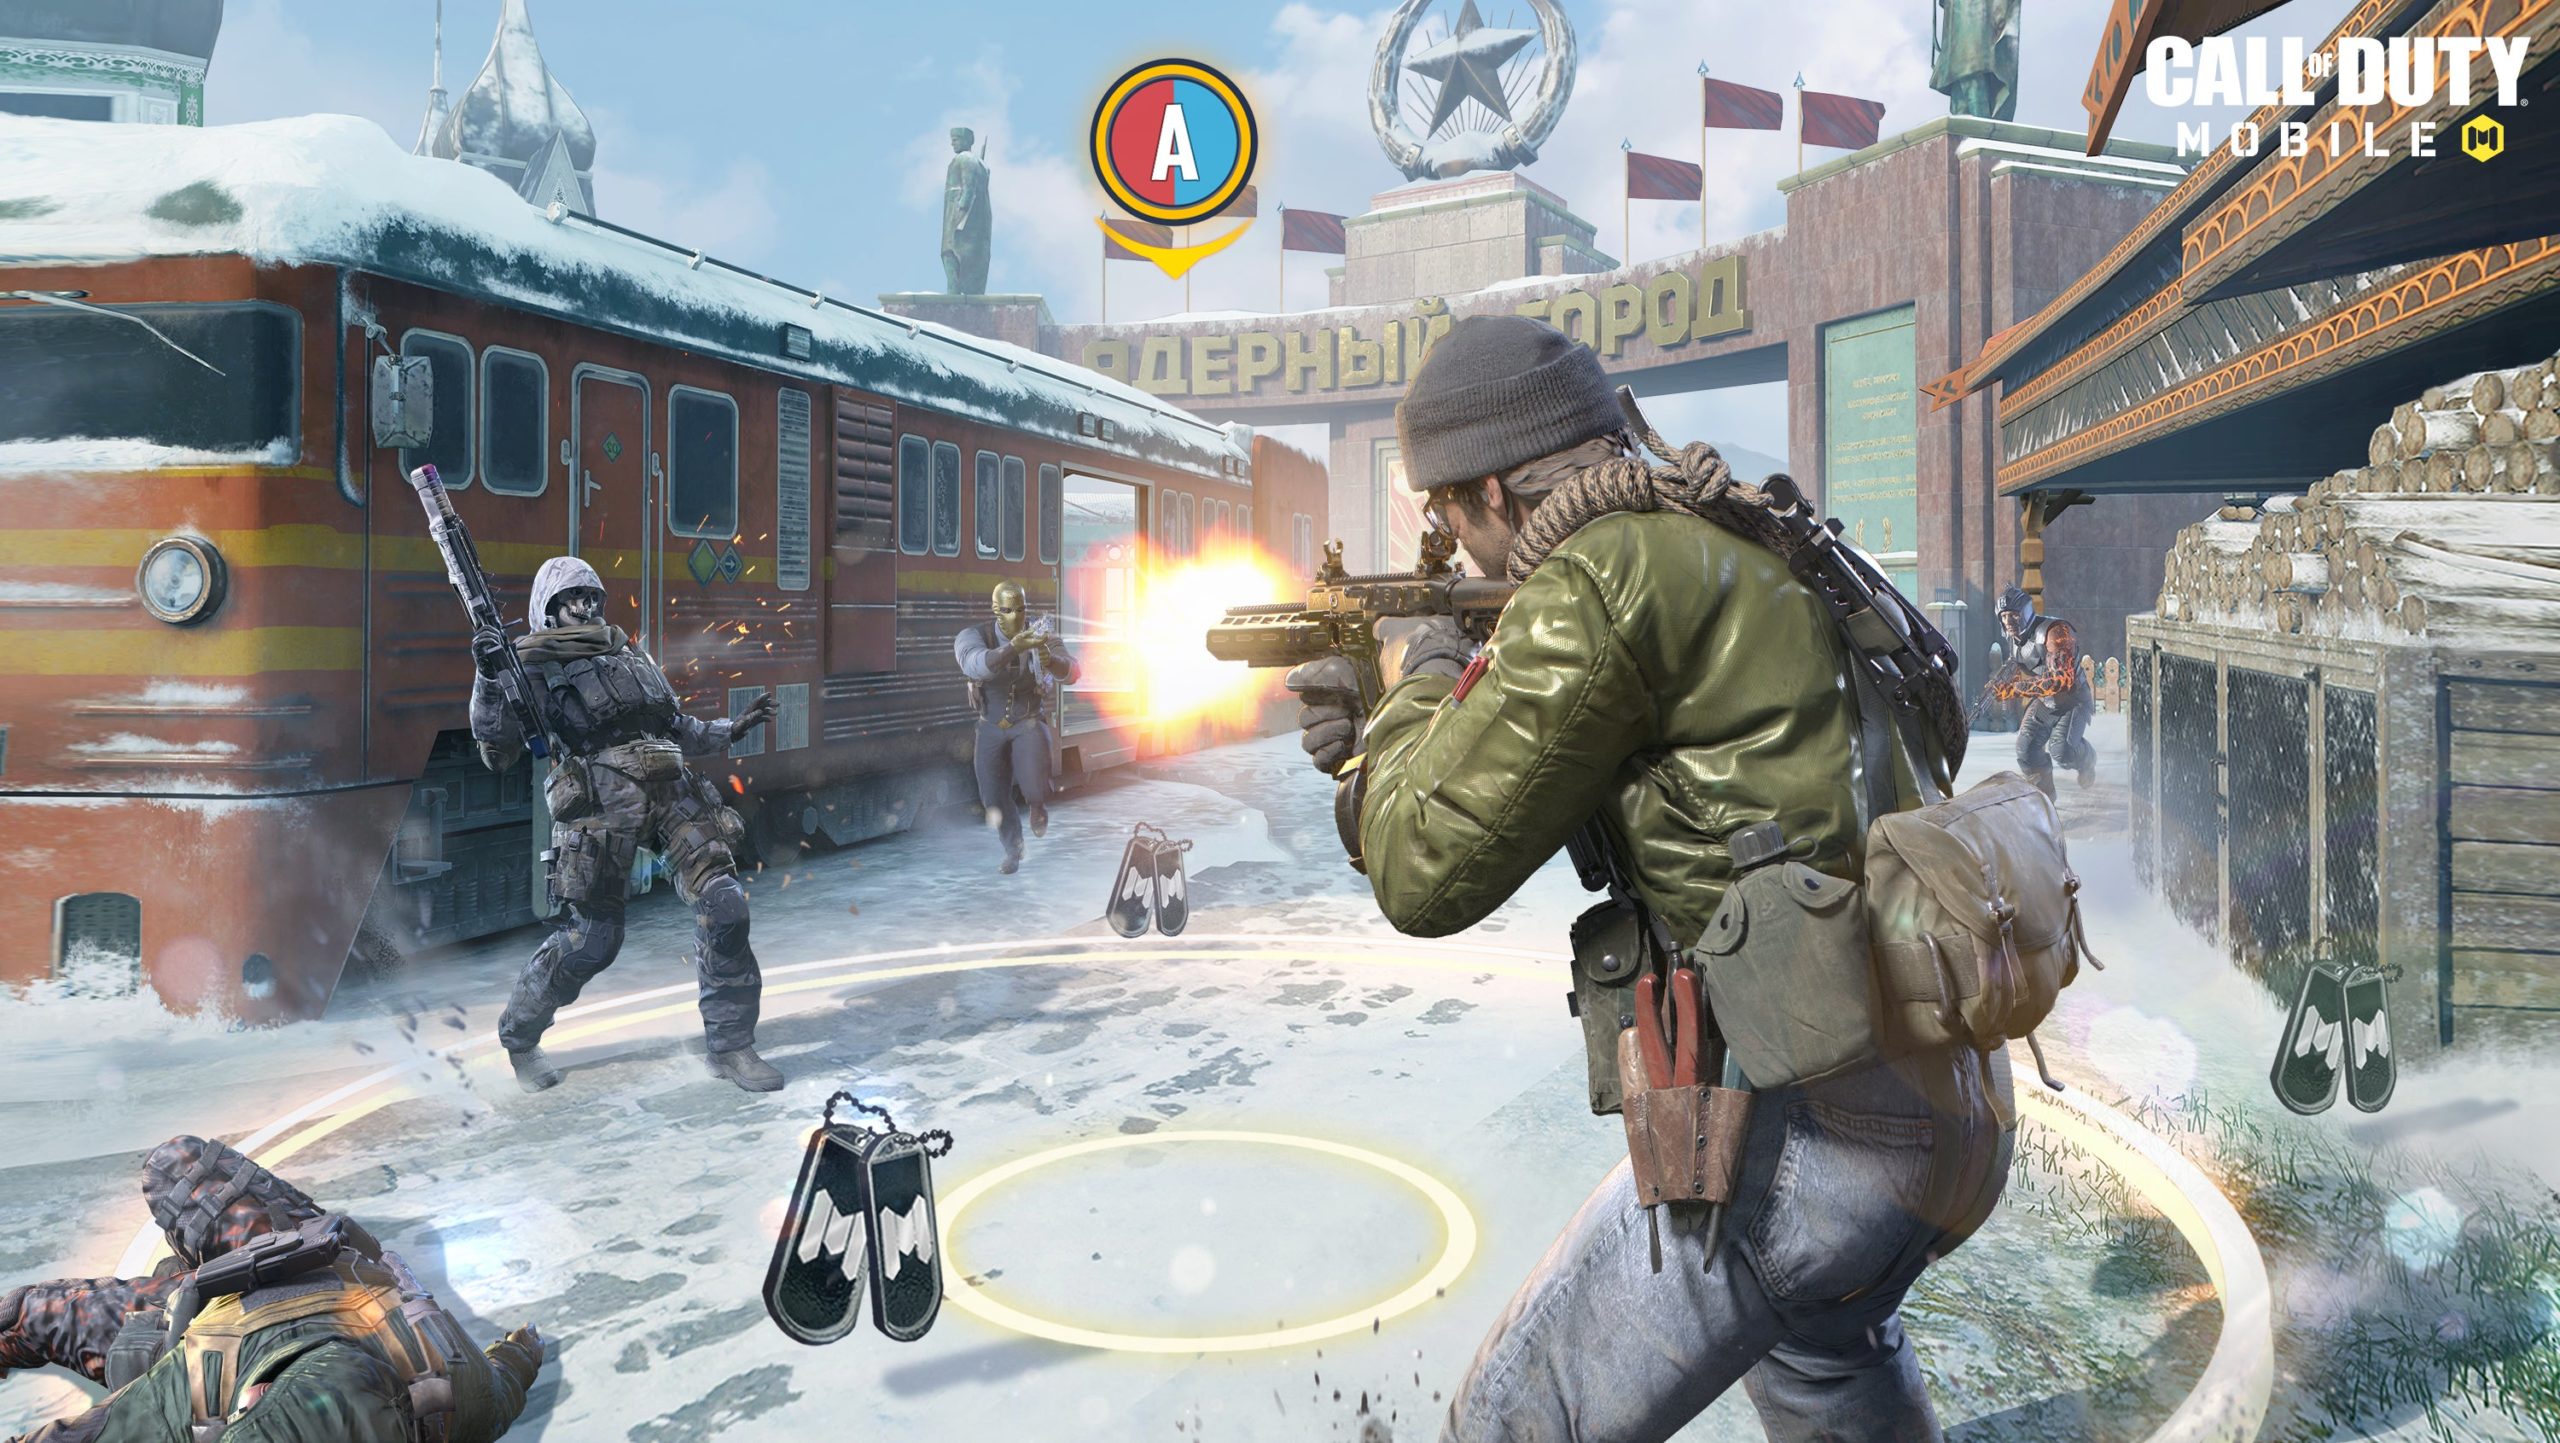 Call of Duty: Mobile' will likely be phased out in favor of